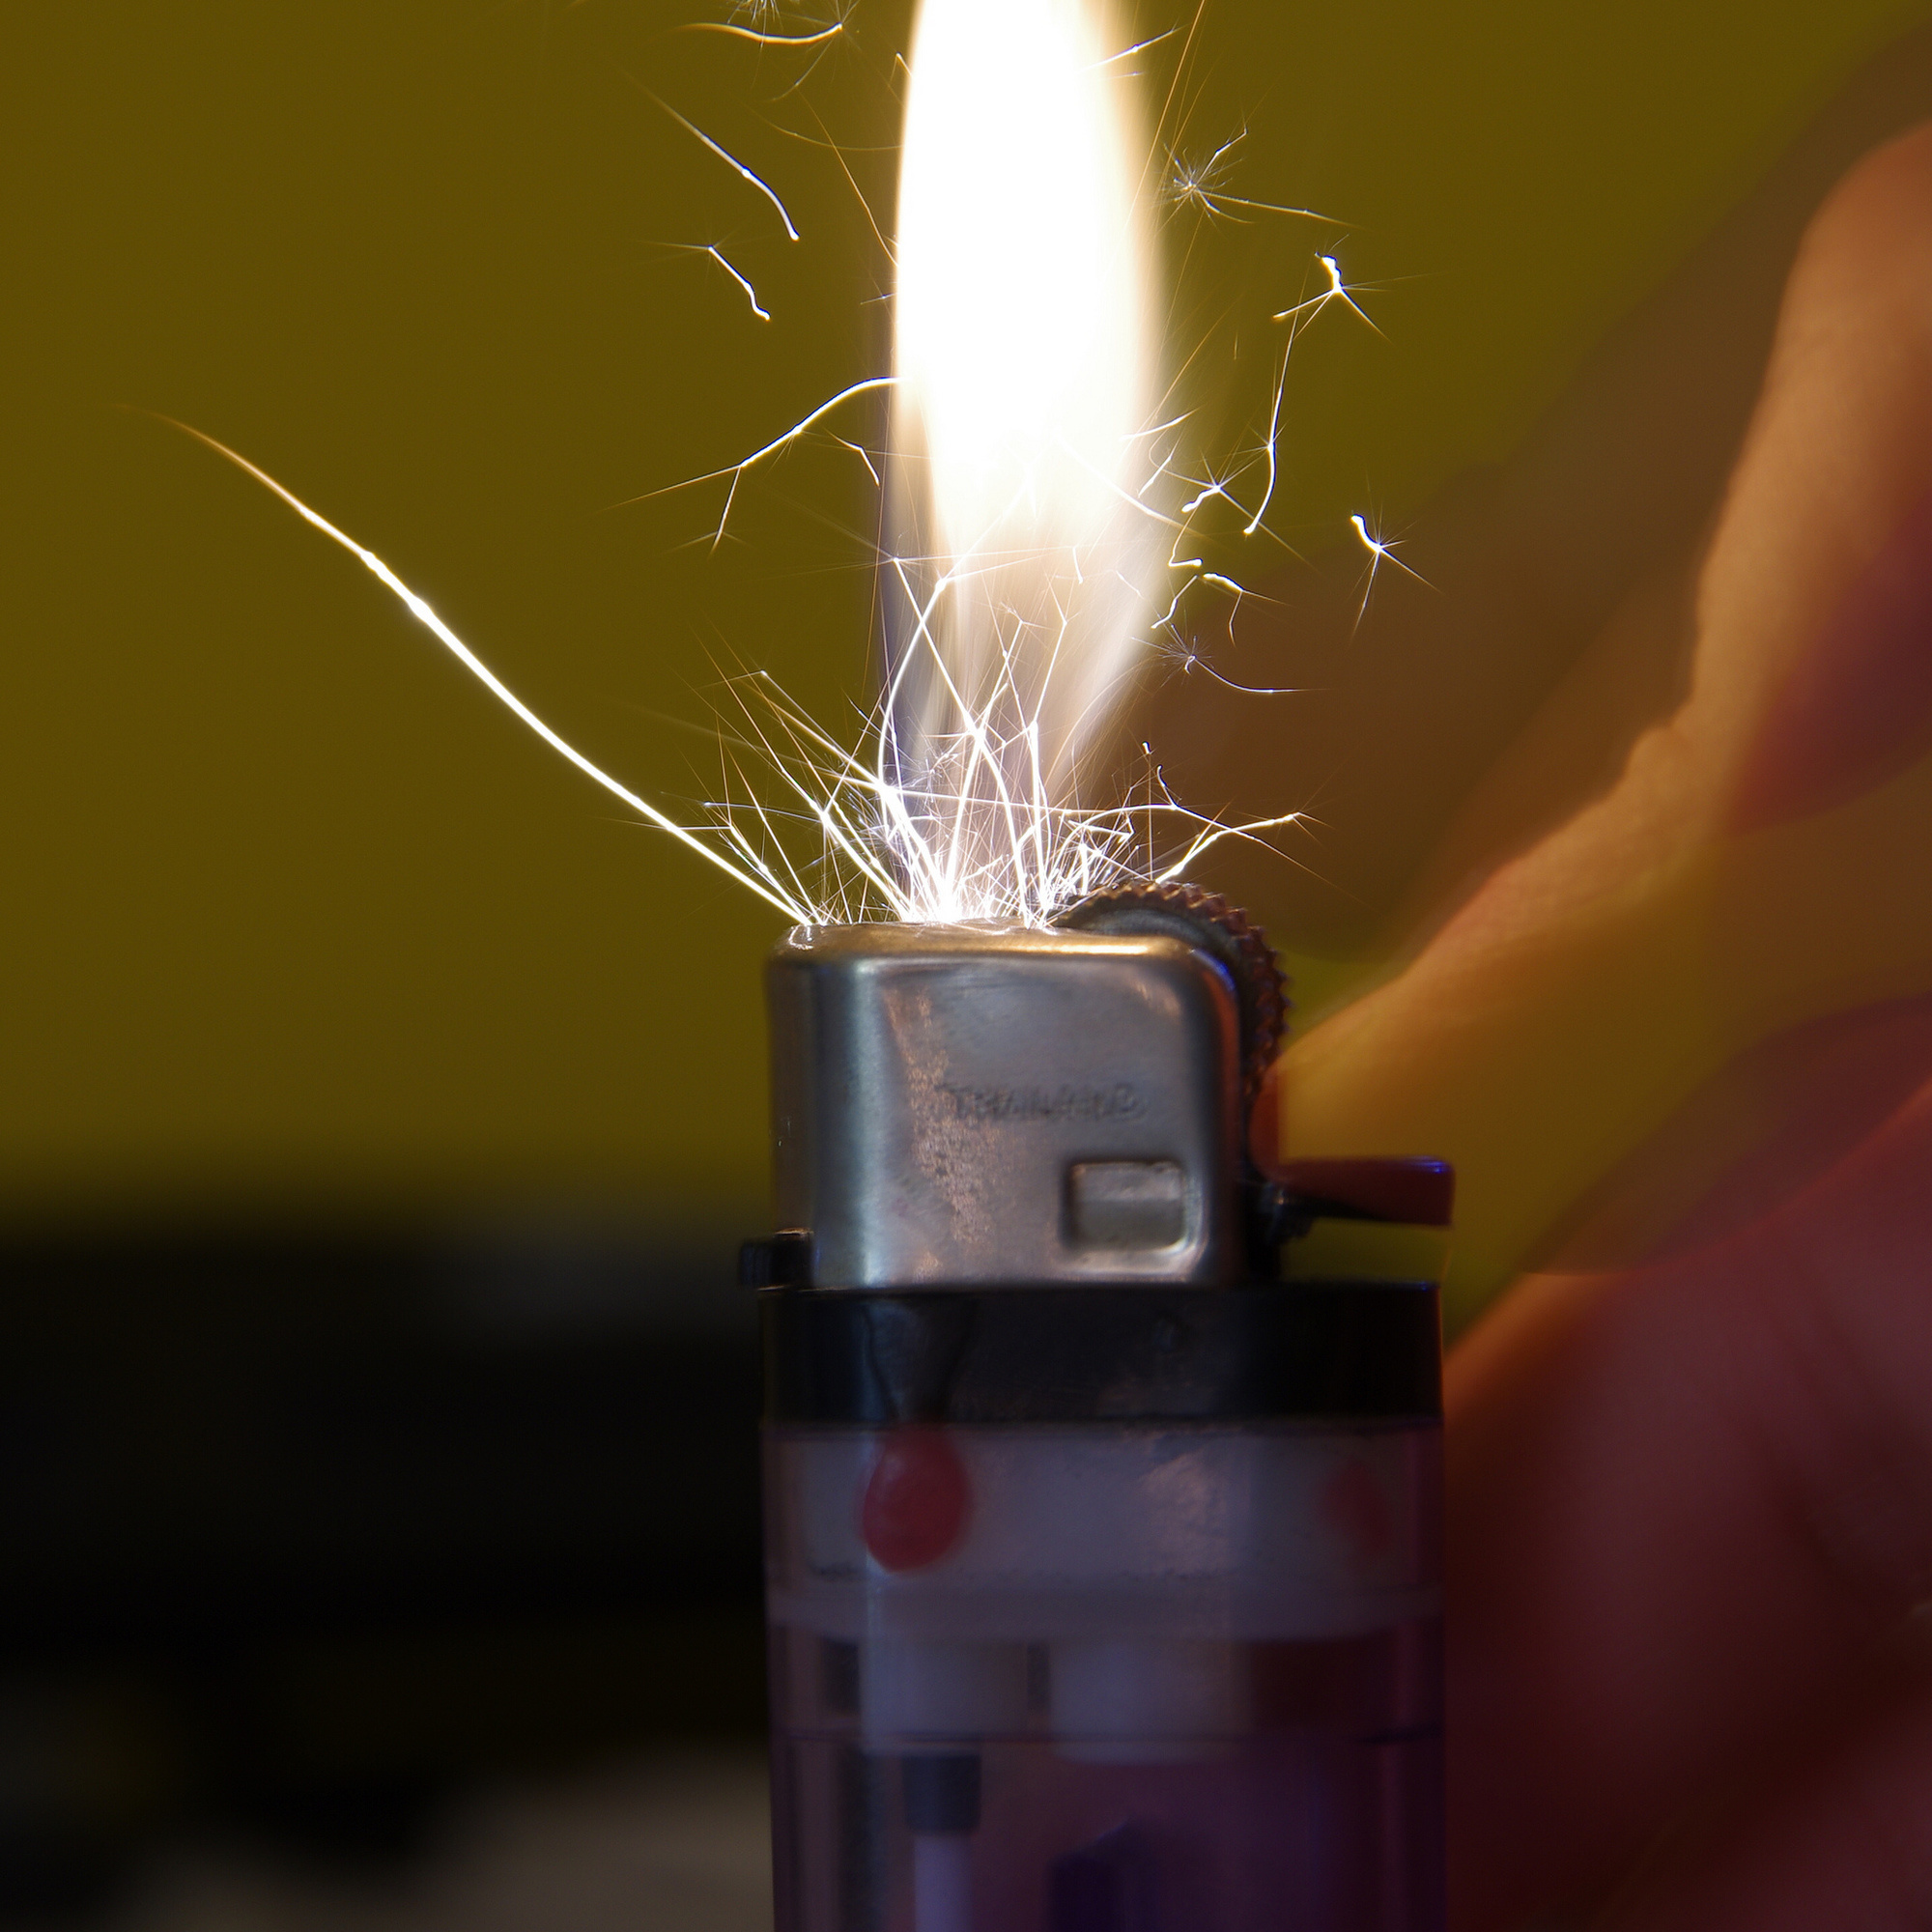 The cigarette lighter was invented before the match.